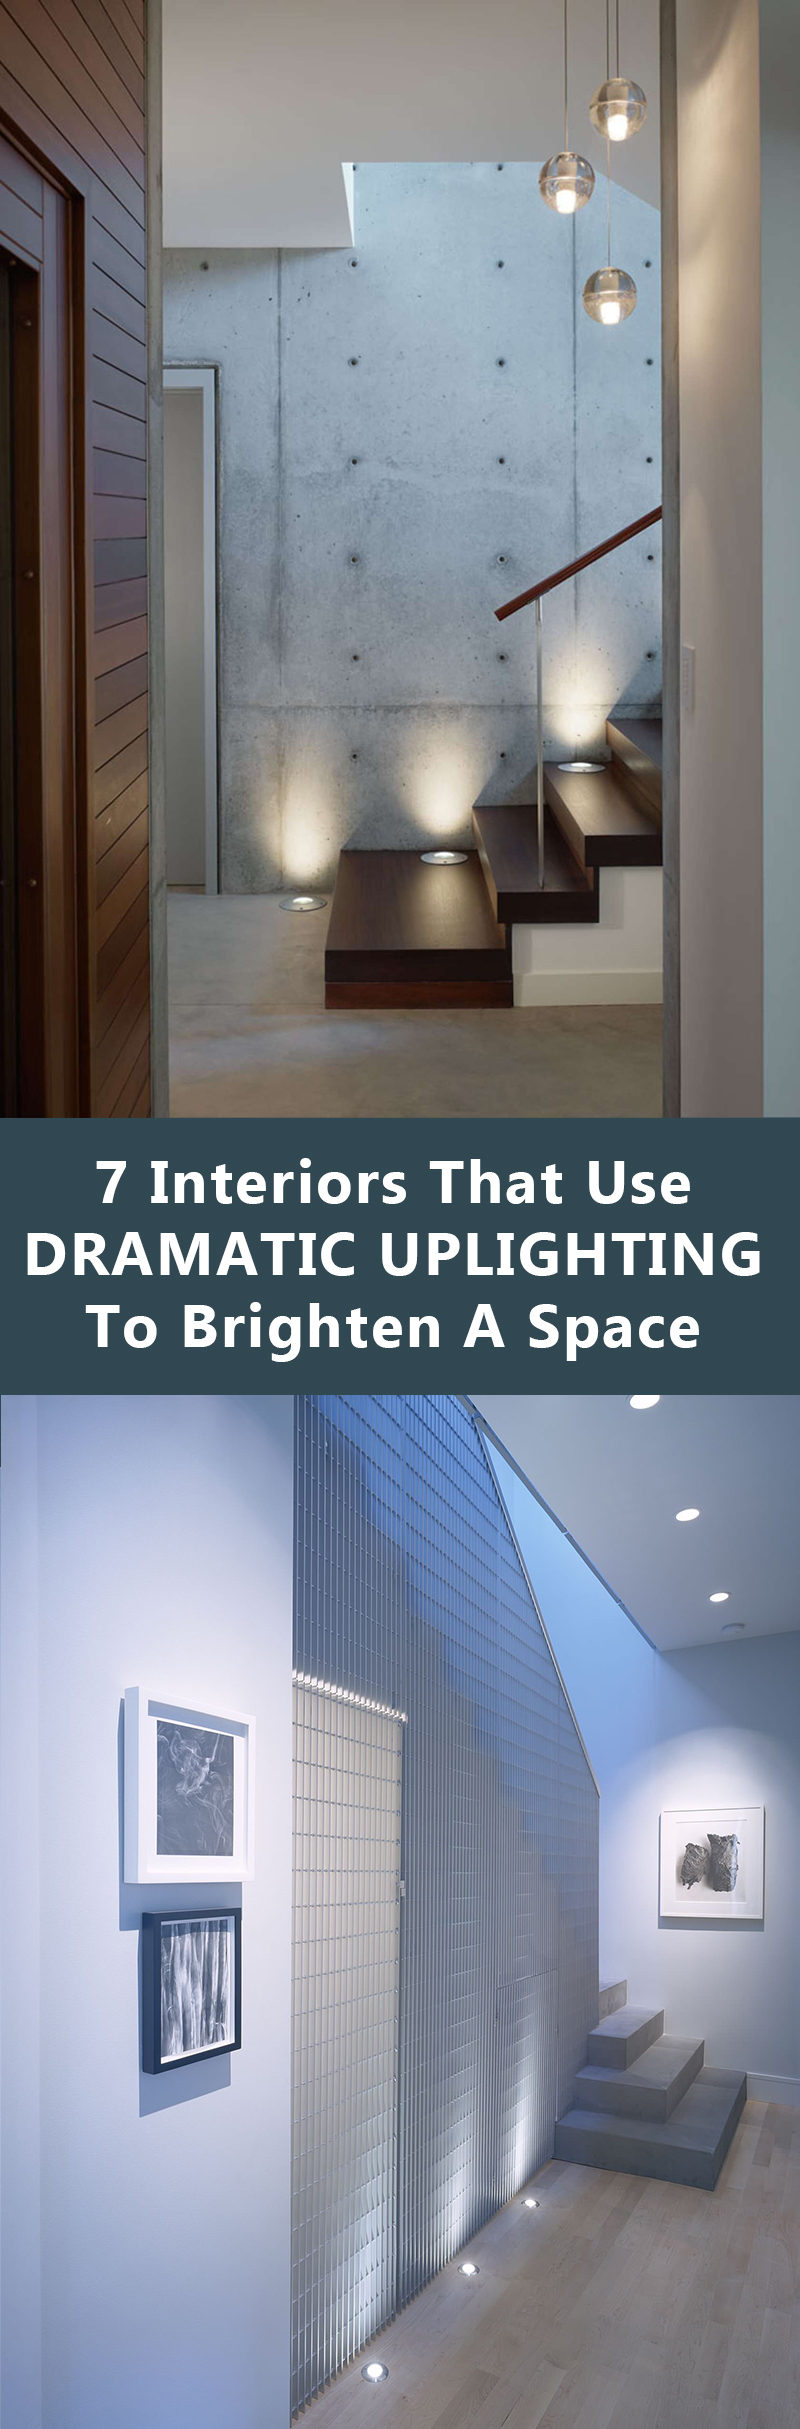 7 Interiors That Use Dramatic Uplighting To Brighten A Space